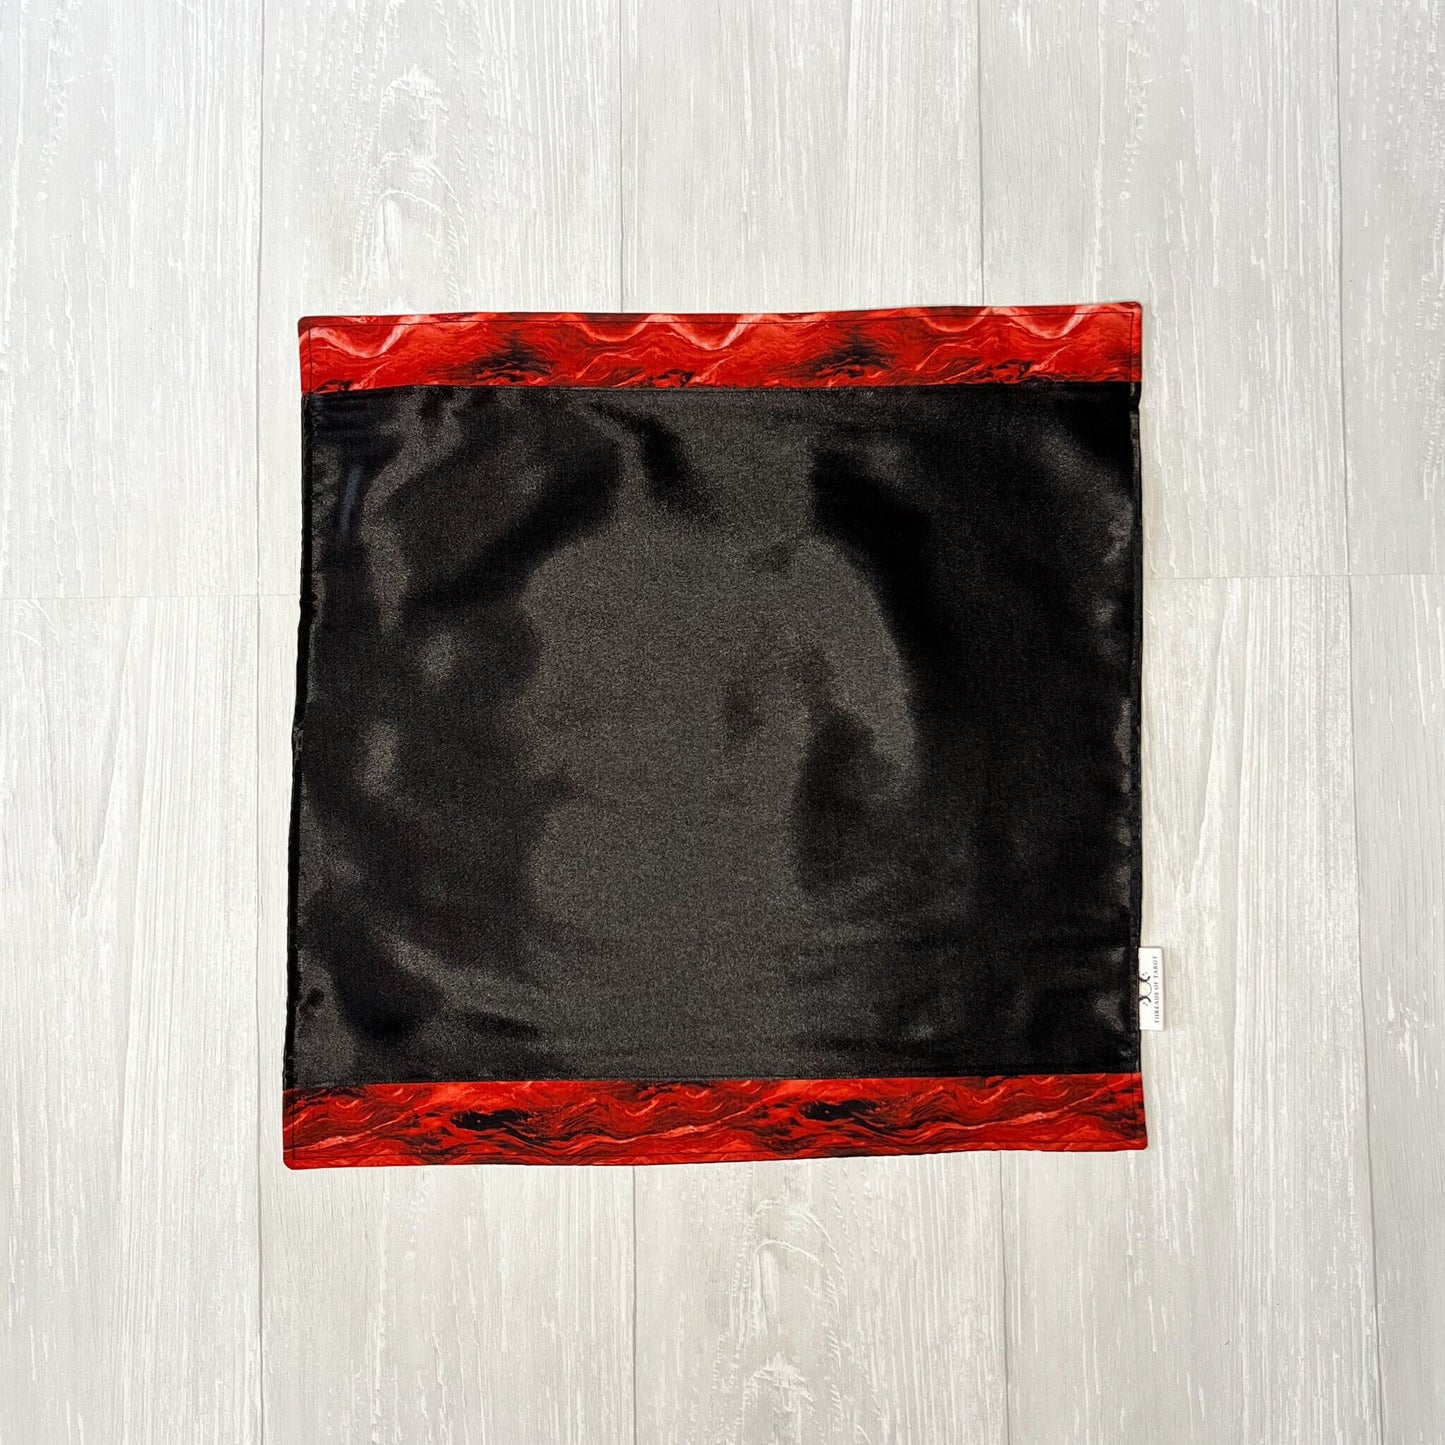 Black Altar Cloth with Red Border Detail, Ritual Cloth, Rune Casting, Tarot Reading Cloth & Supplies, Witchy Gift Supplies, Divination Tools